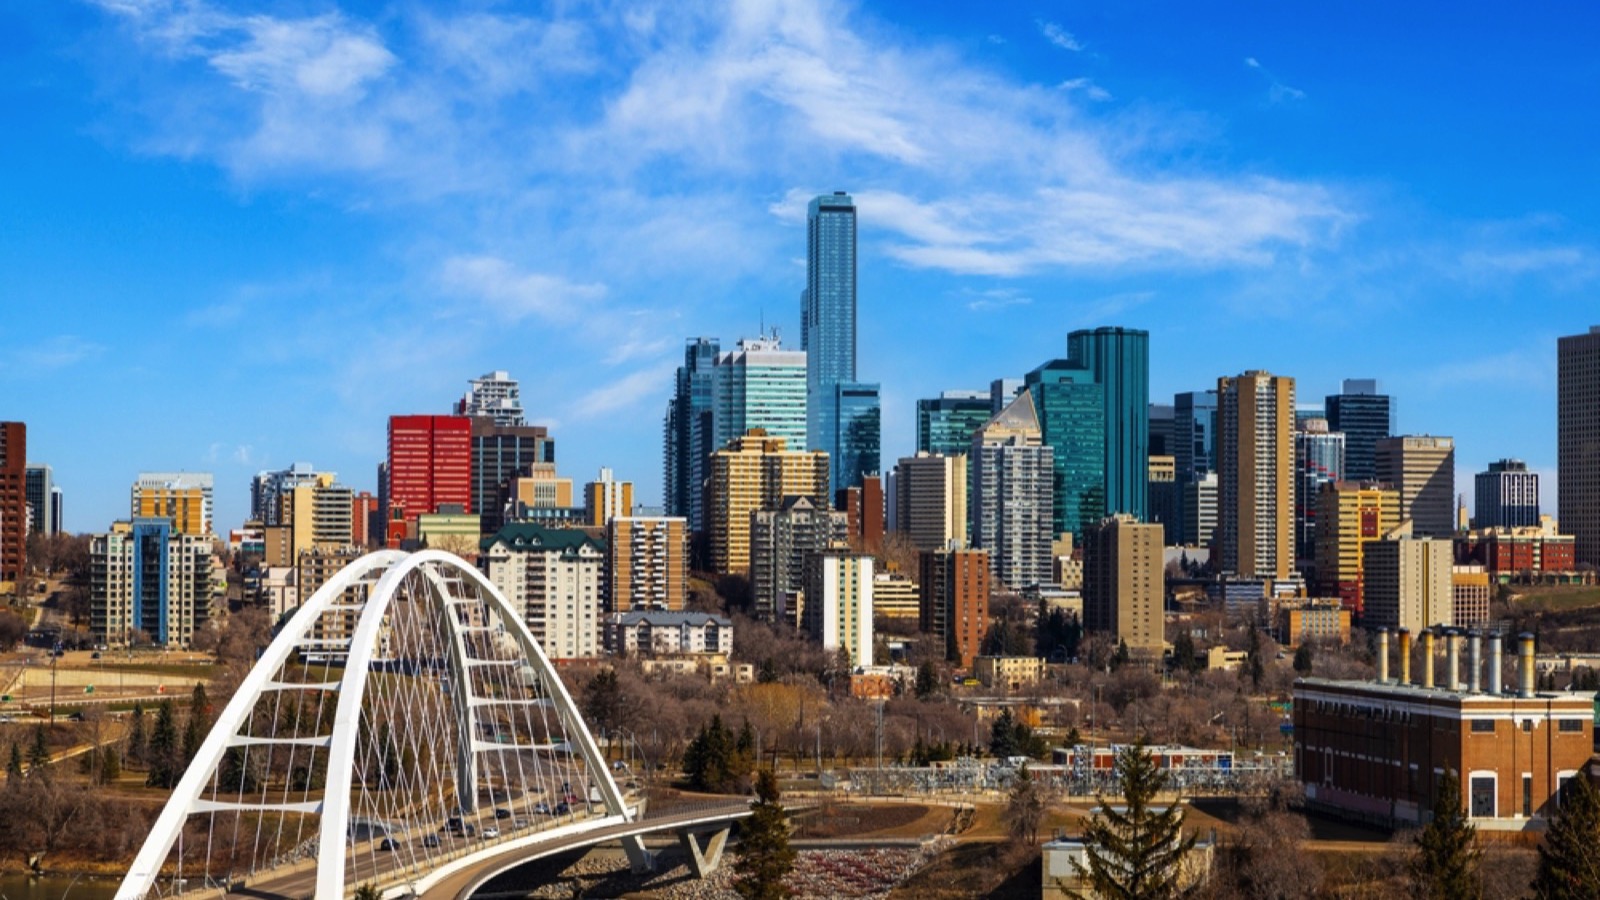 <p>One user said they thought they would hate their trip to Edmonton, but they loved it in Edmonton. Another user explained how the skies seem more "open" in Edmonton, and it's an incredible sight that can't be put into words.</p>